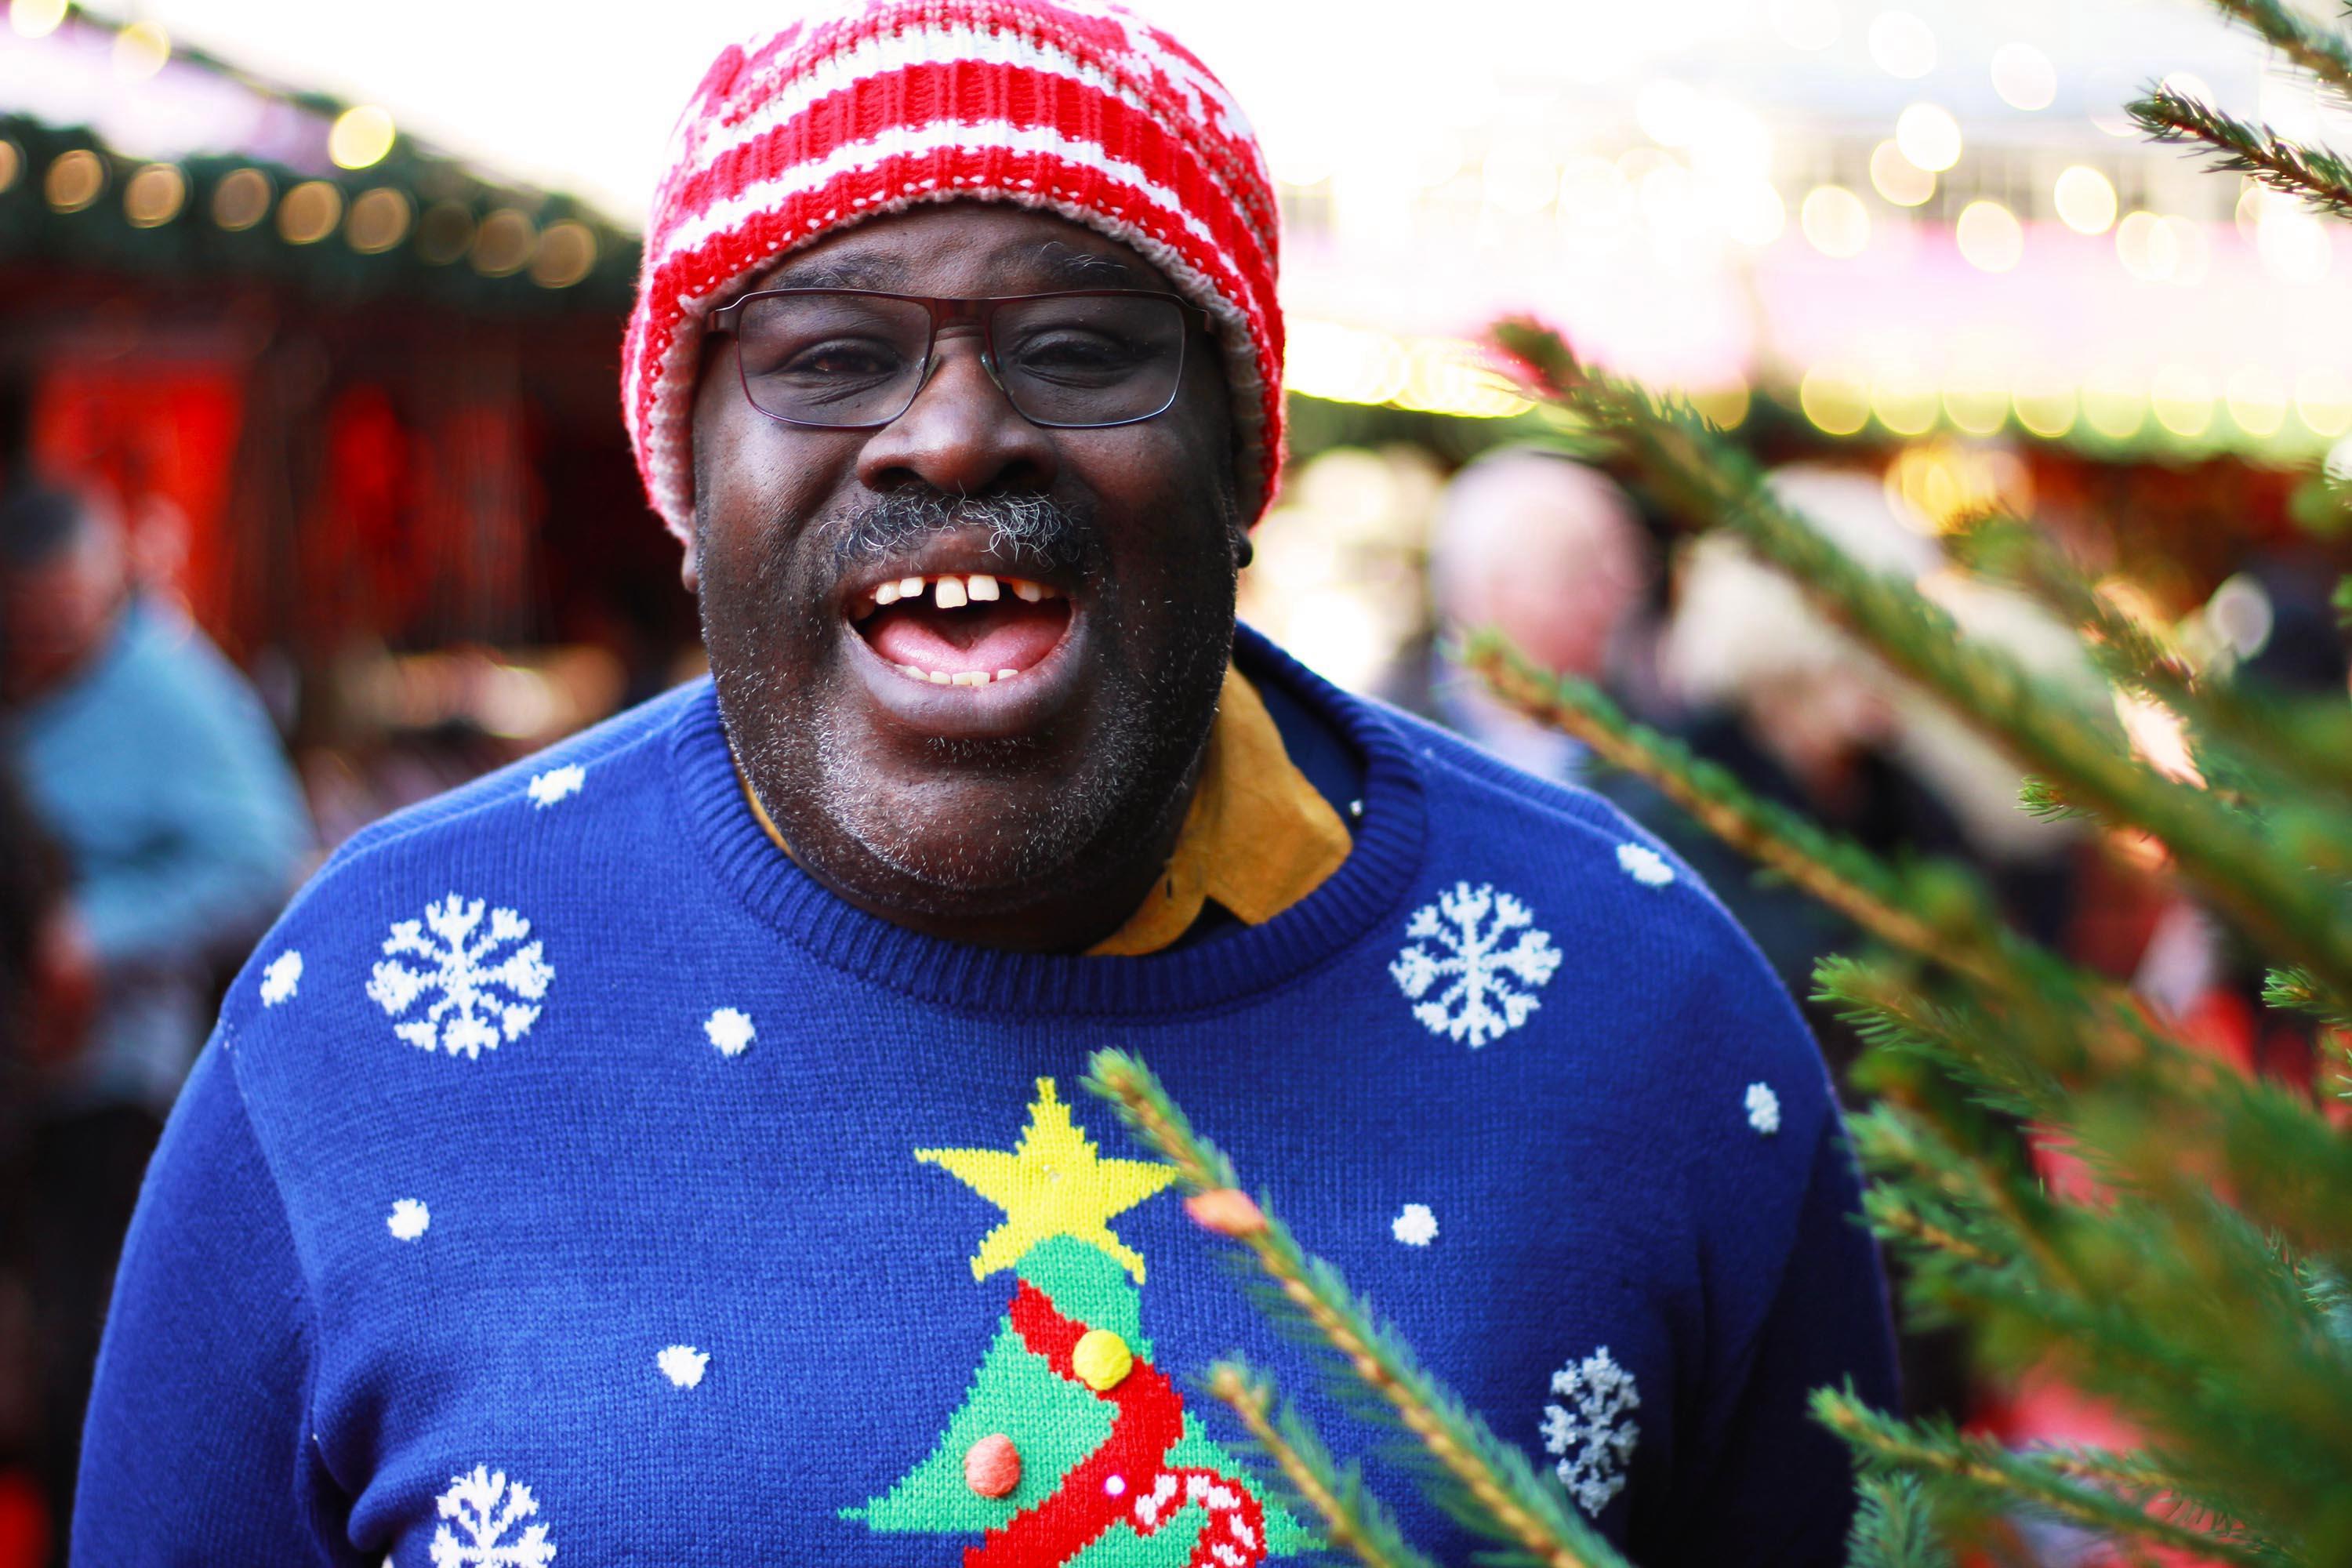 Watch The Undateables at Christmas